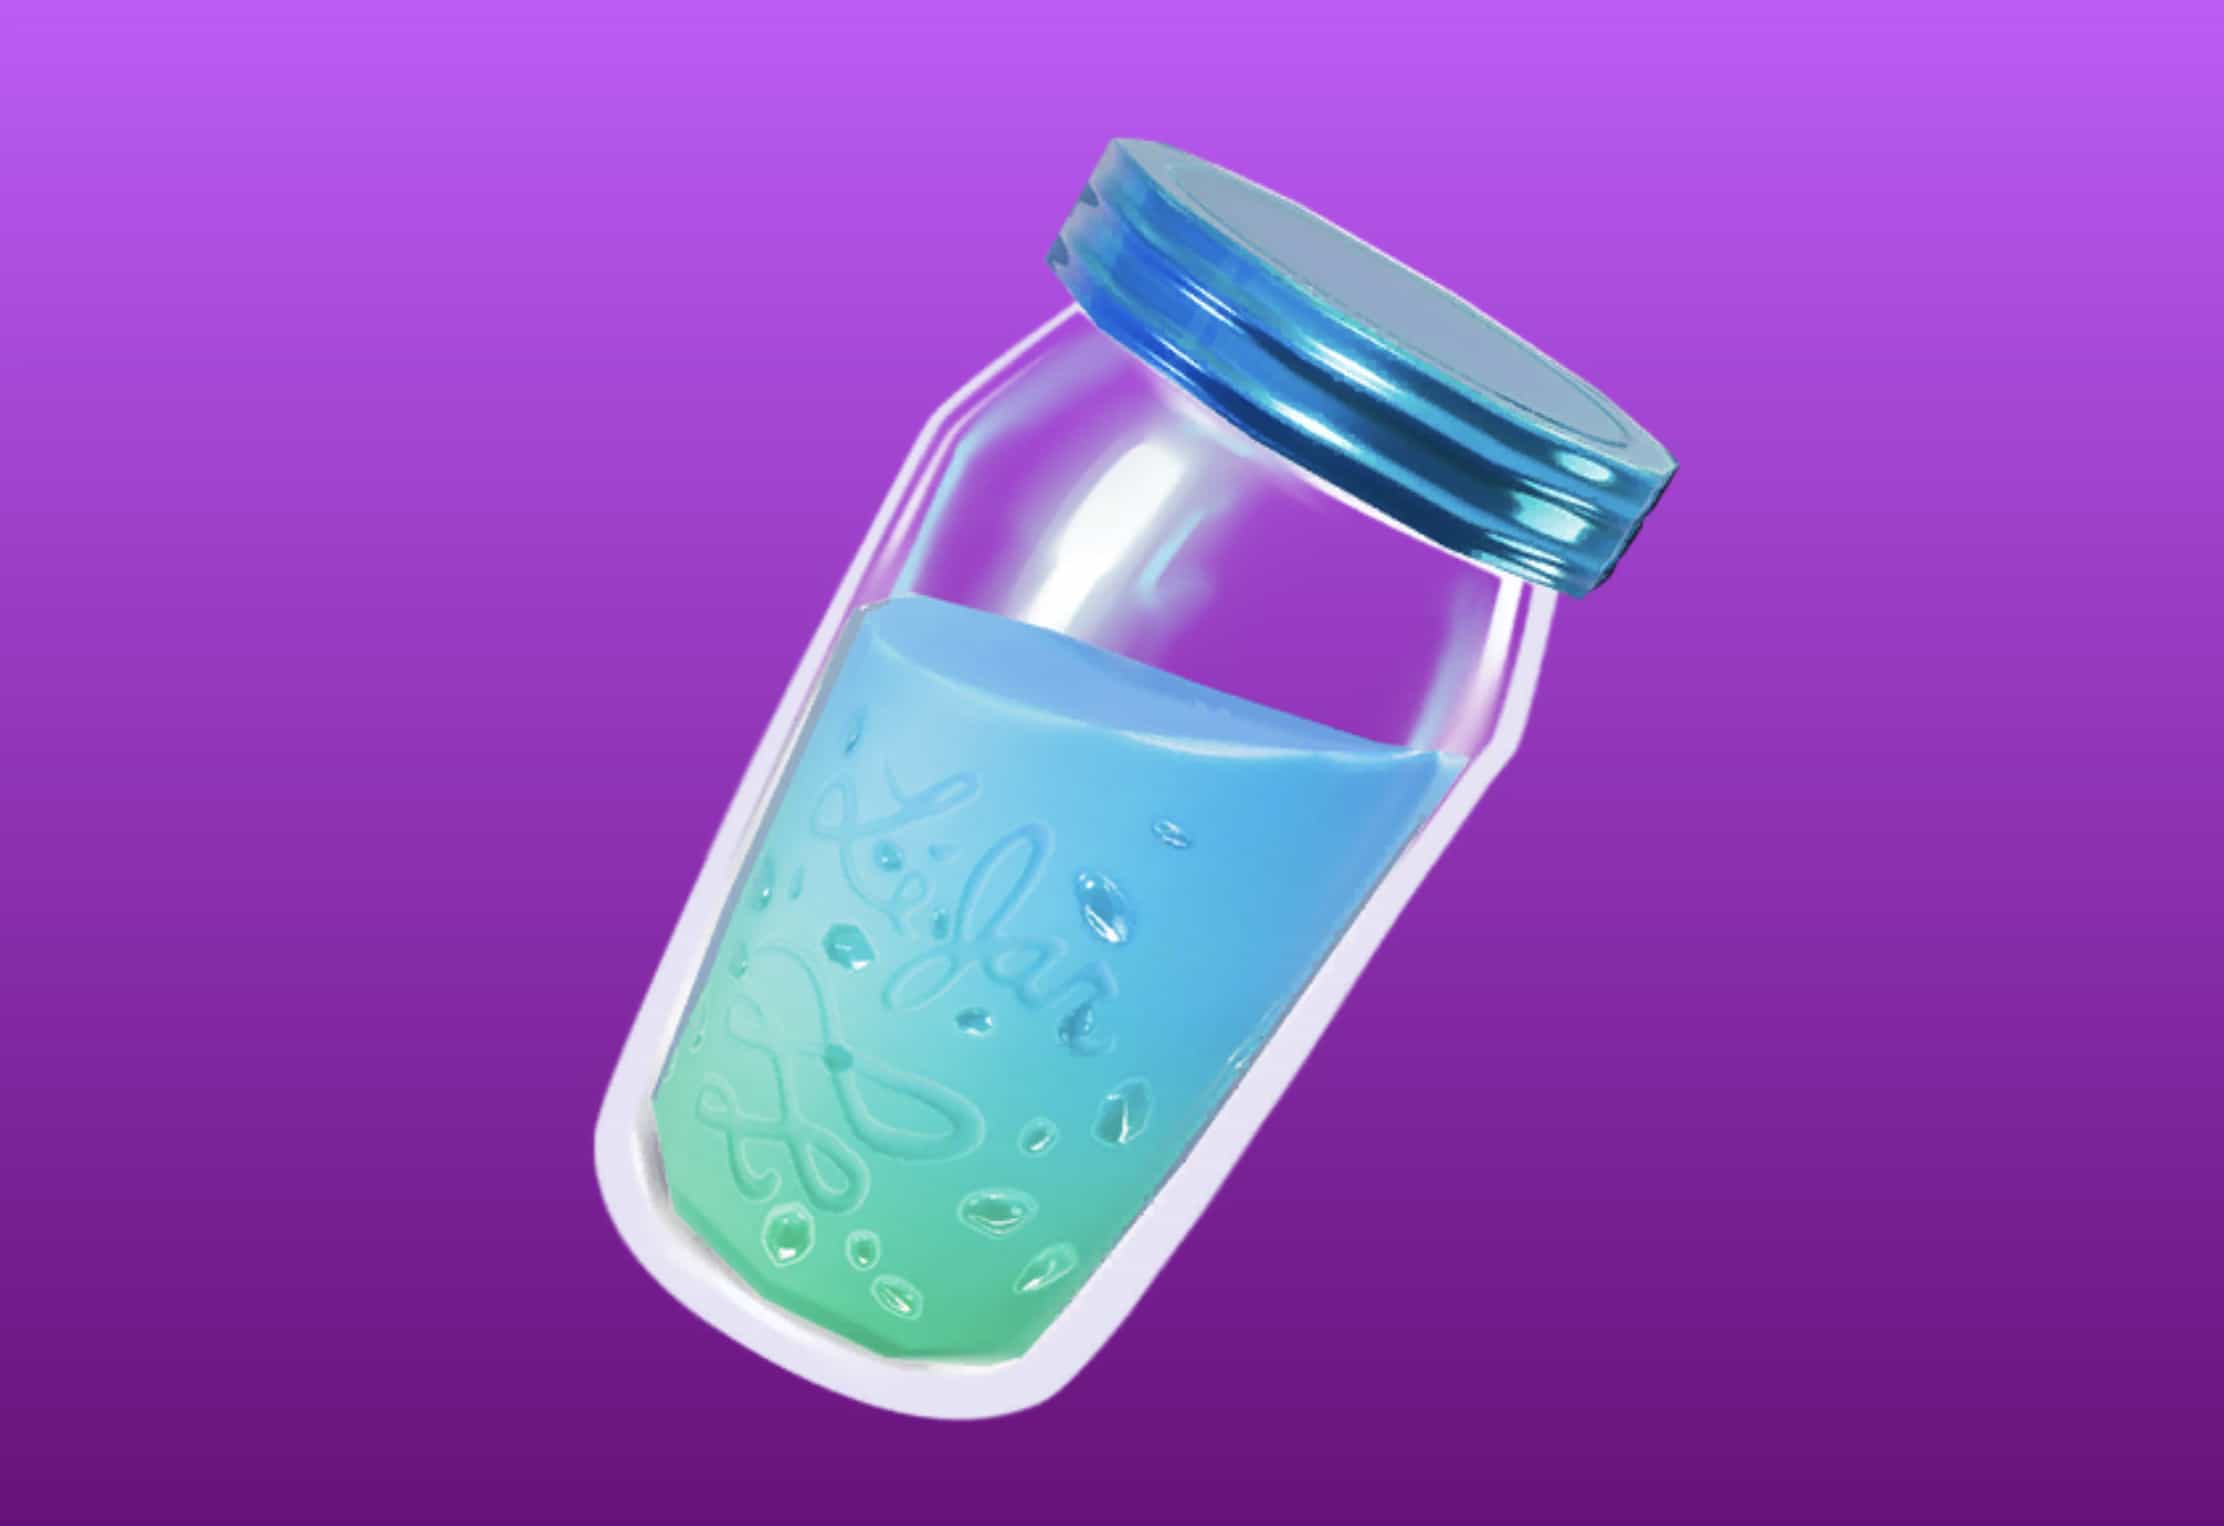 fortnite-is-getting-another-new-smg-big-slurp-juice-improvements